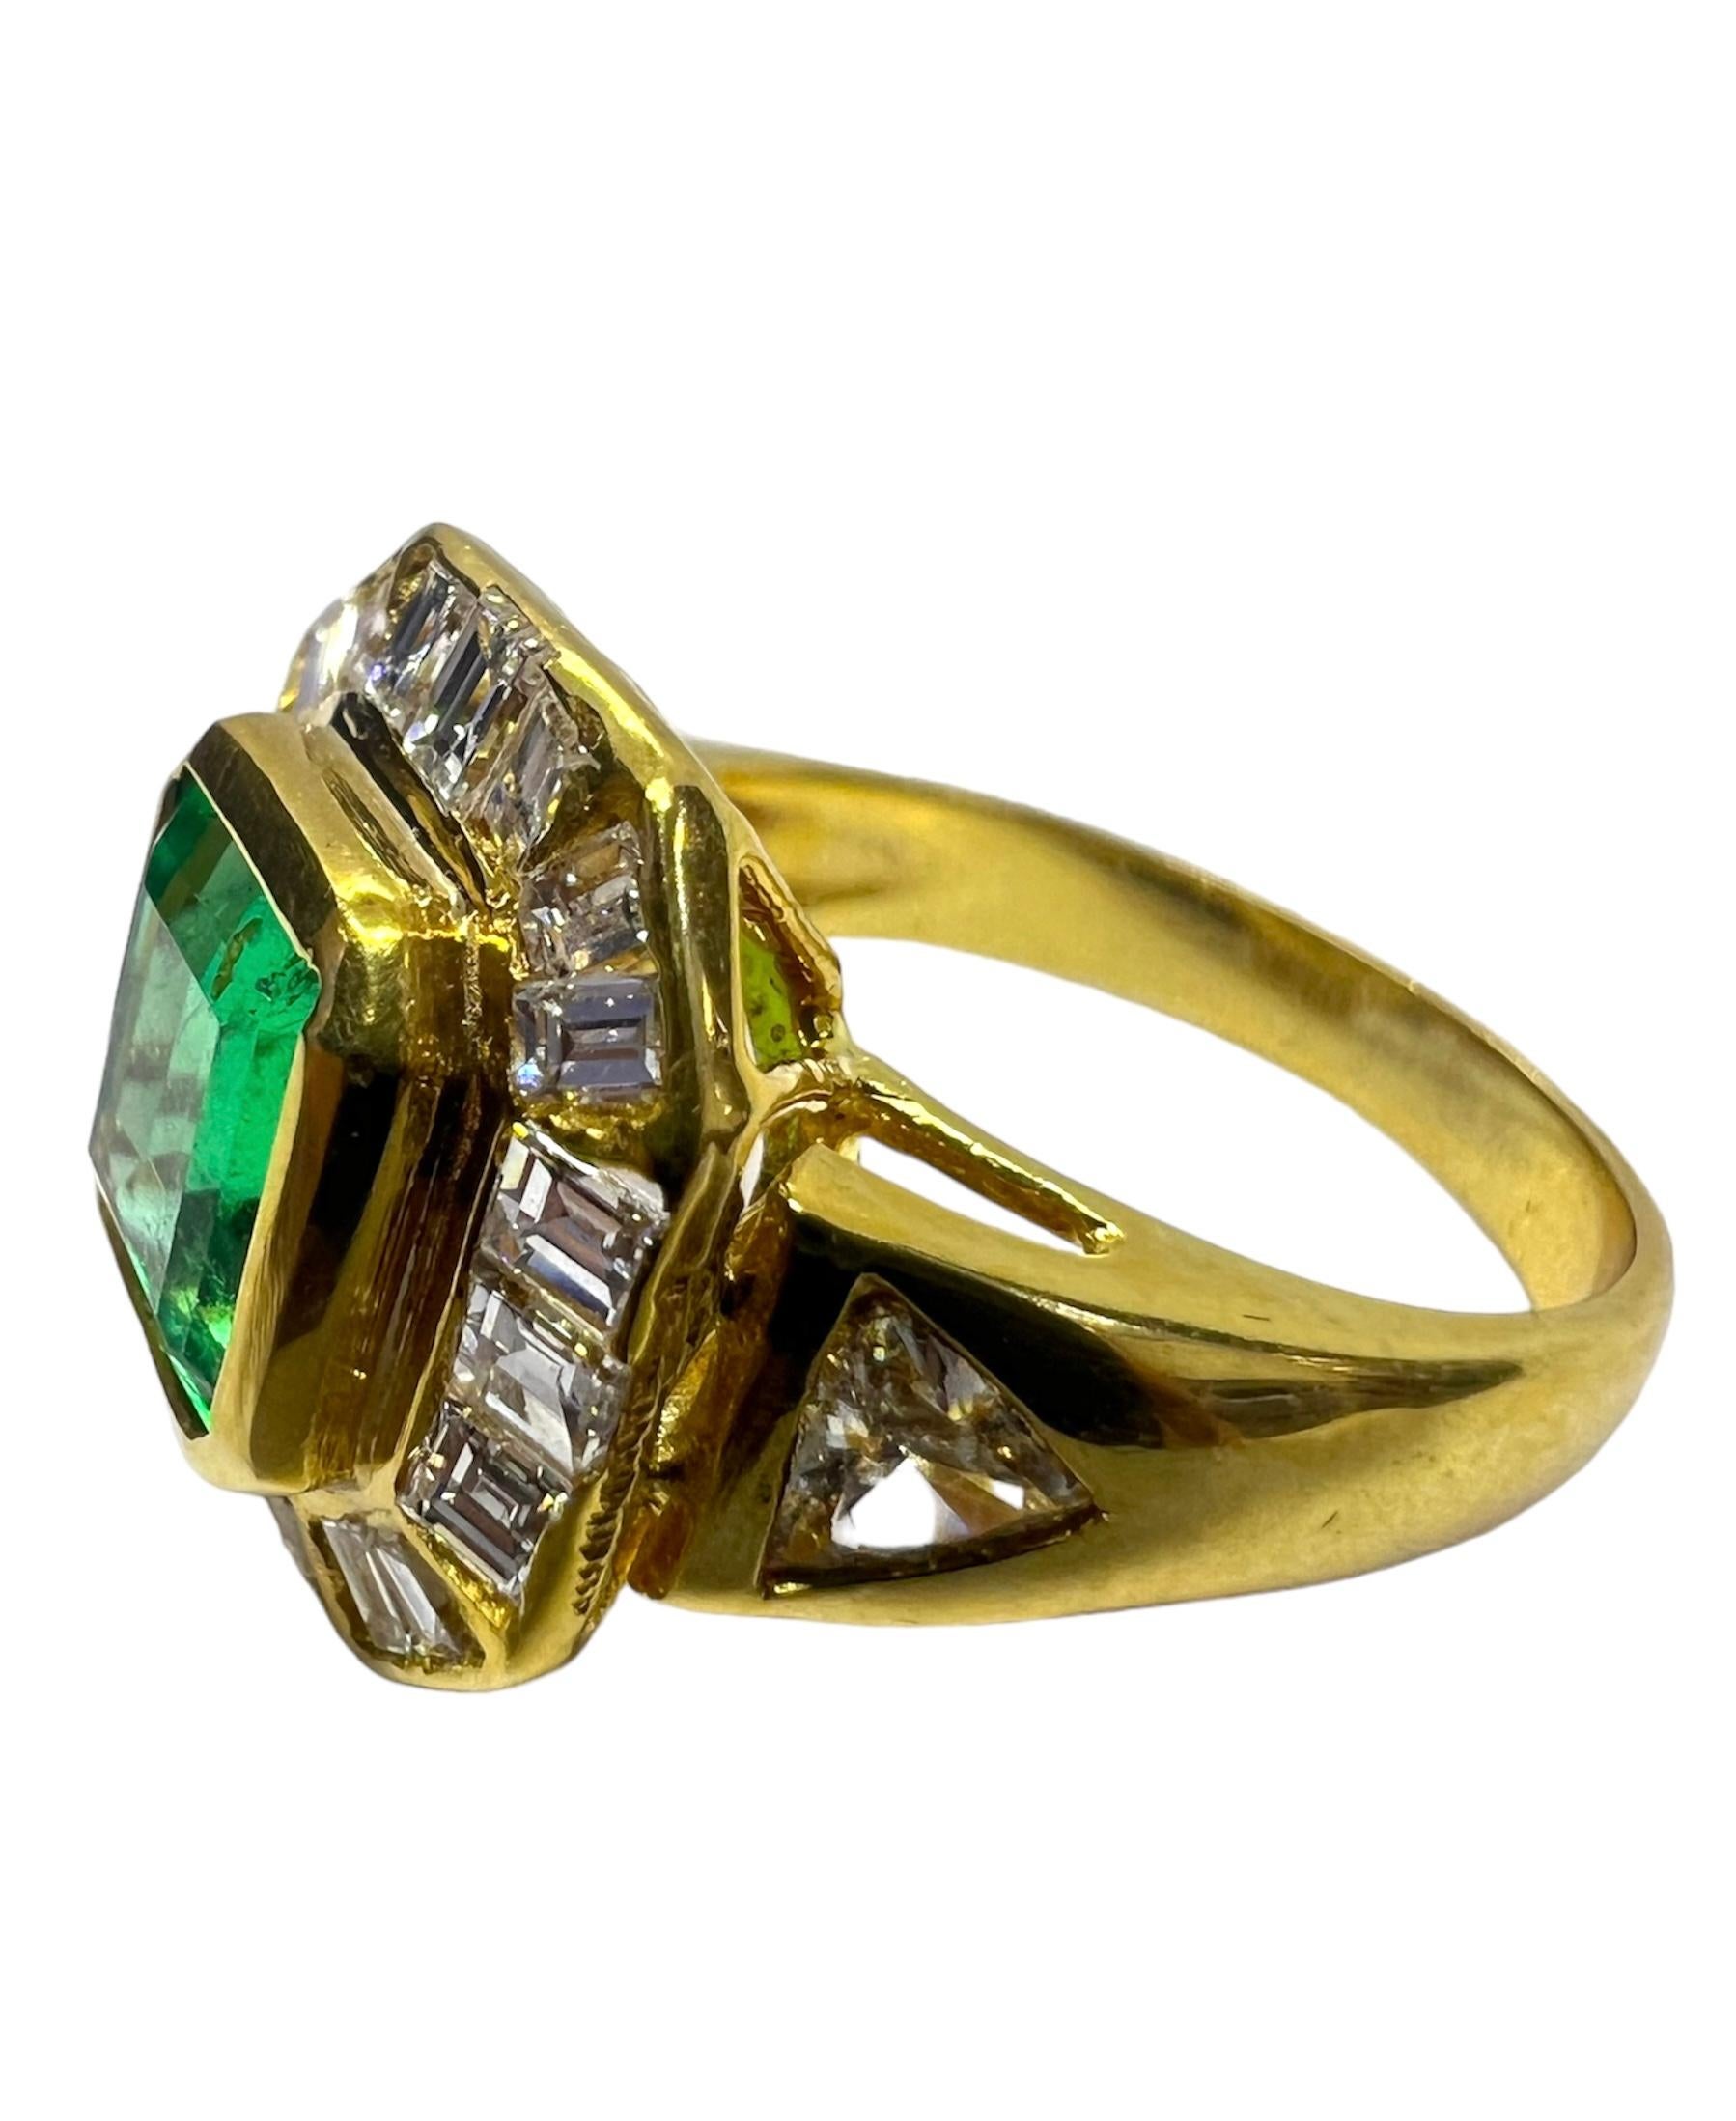 18K yellow gold ring with emerald and diamond.

Sophia D by Joseph Dardashti LTD has been known worldwide for 35 years and are inspired by classic Art Deco design that merges with modern manufacturing techniques.